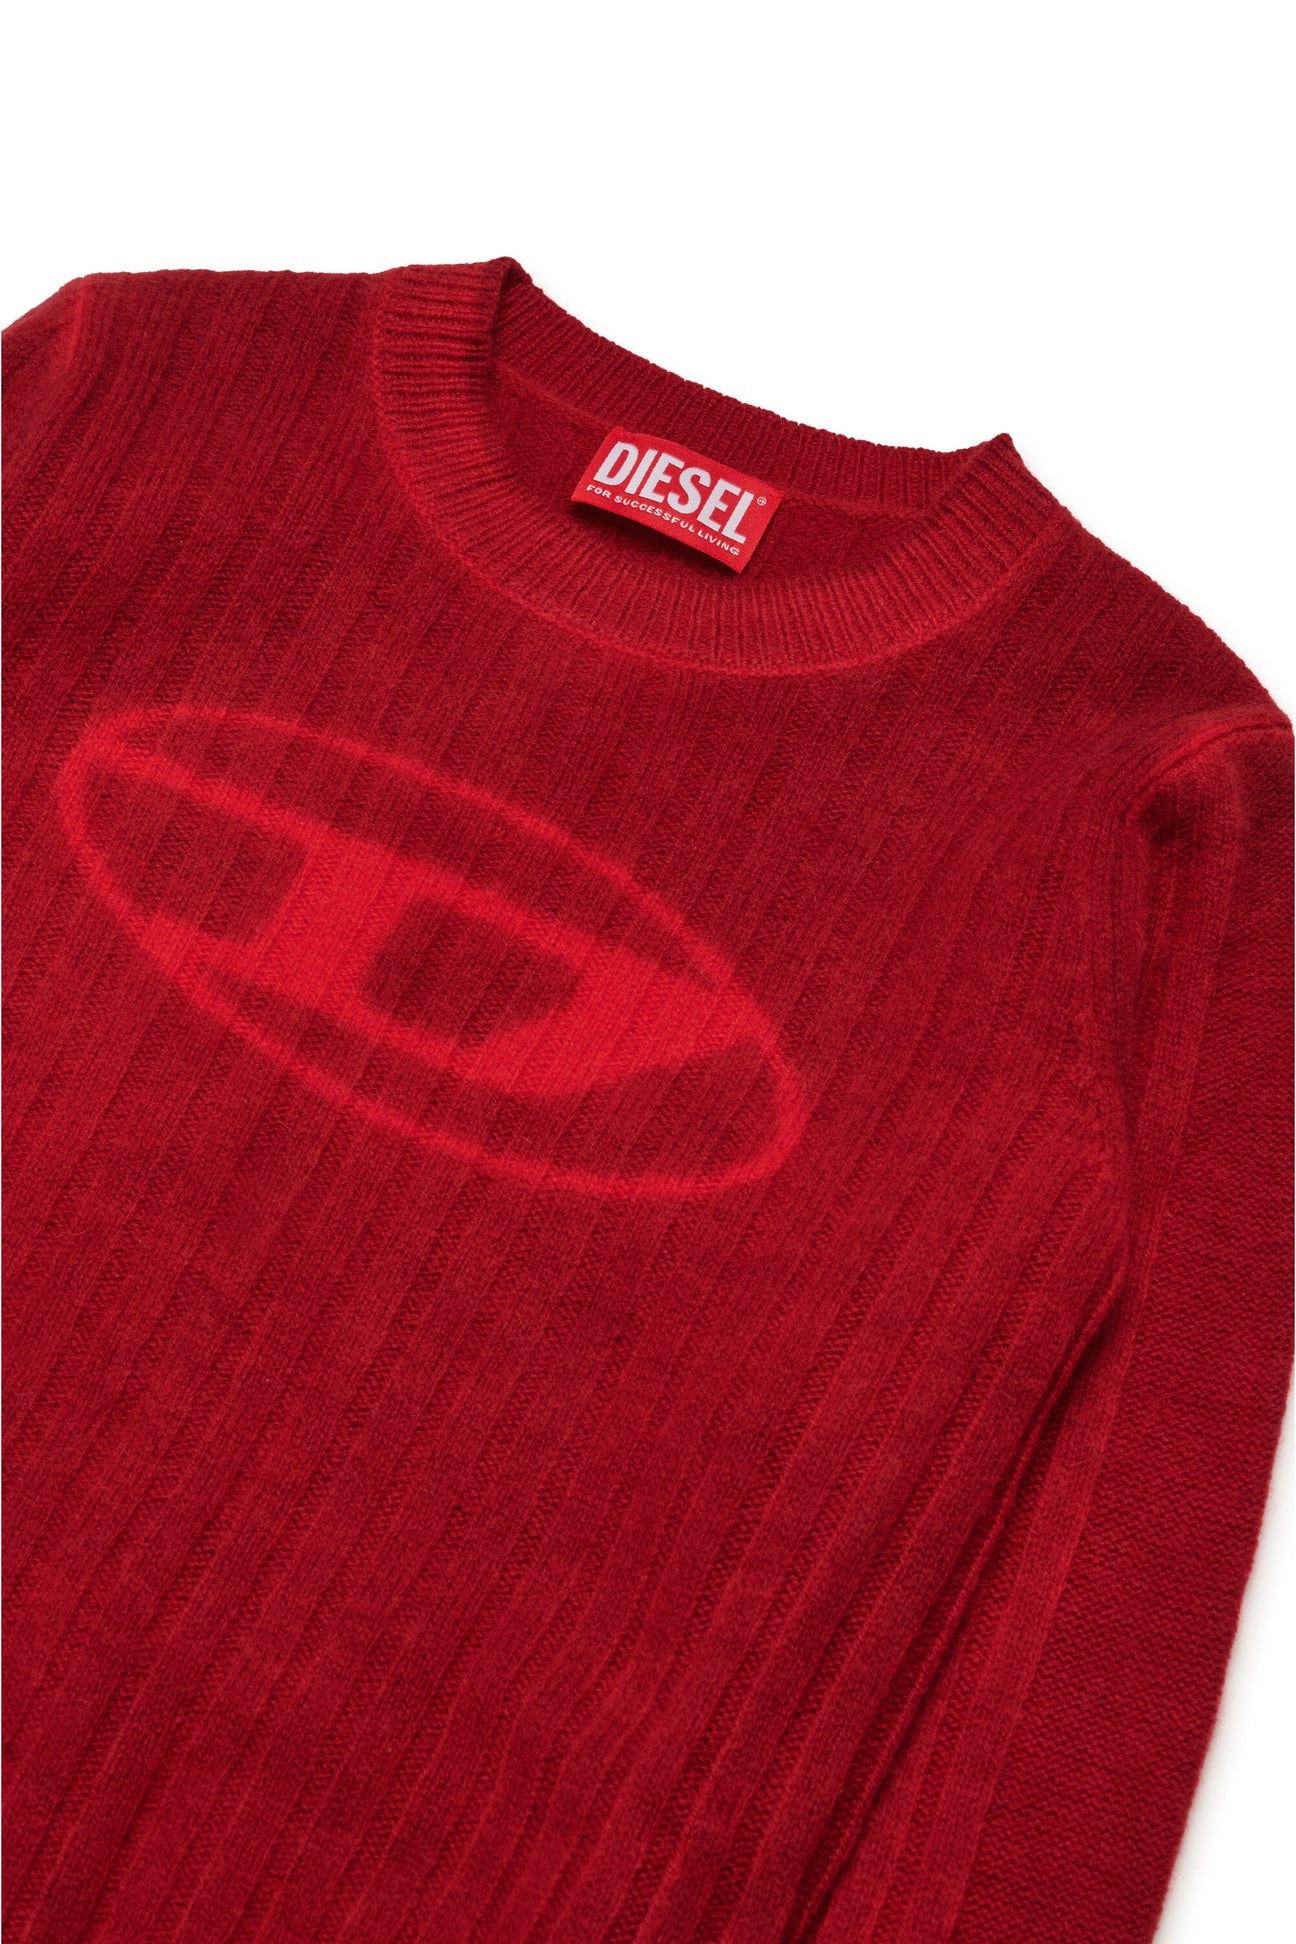 Ribbed wool blend pullover with oval D logo Ribbed wool blend pullover with oval D logo